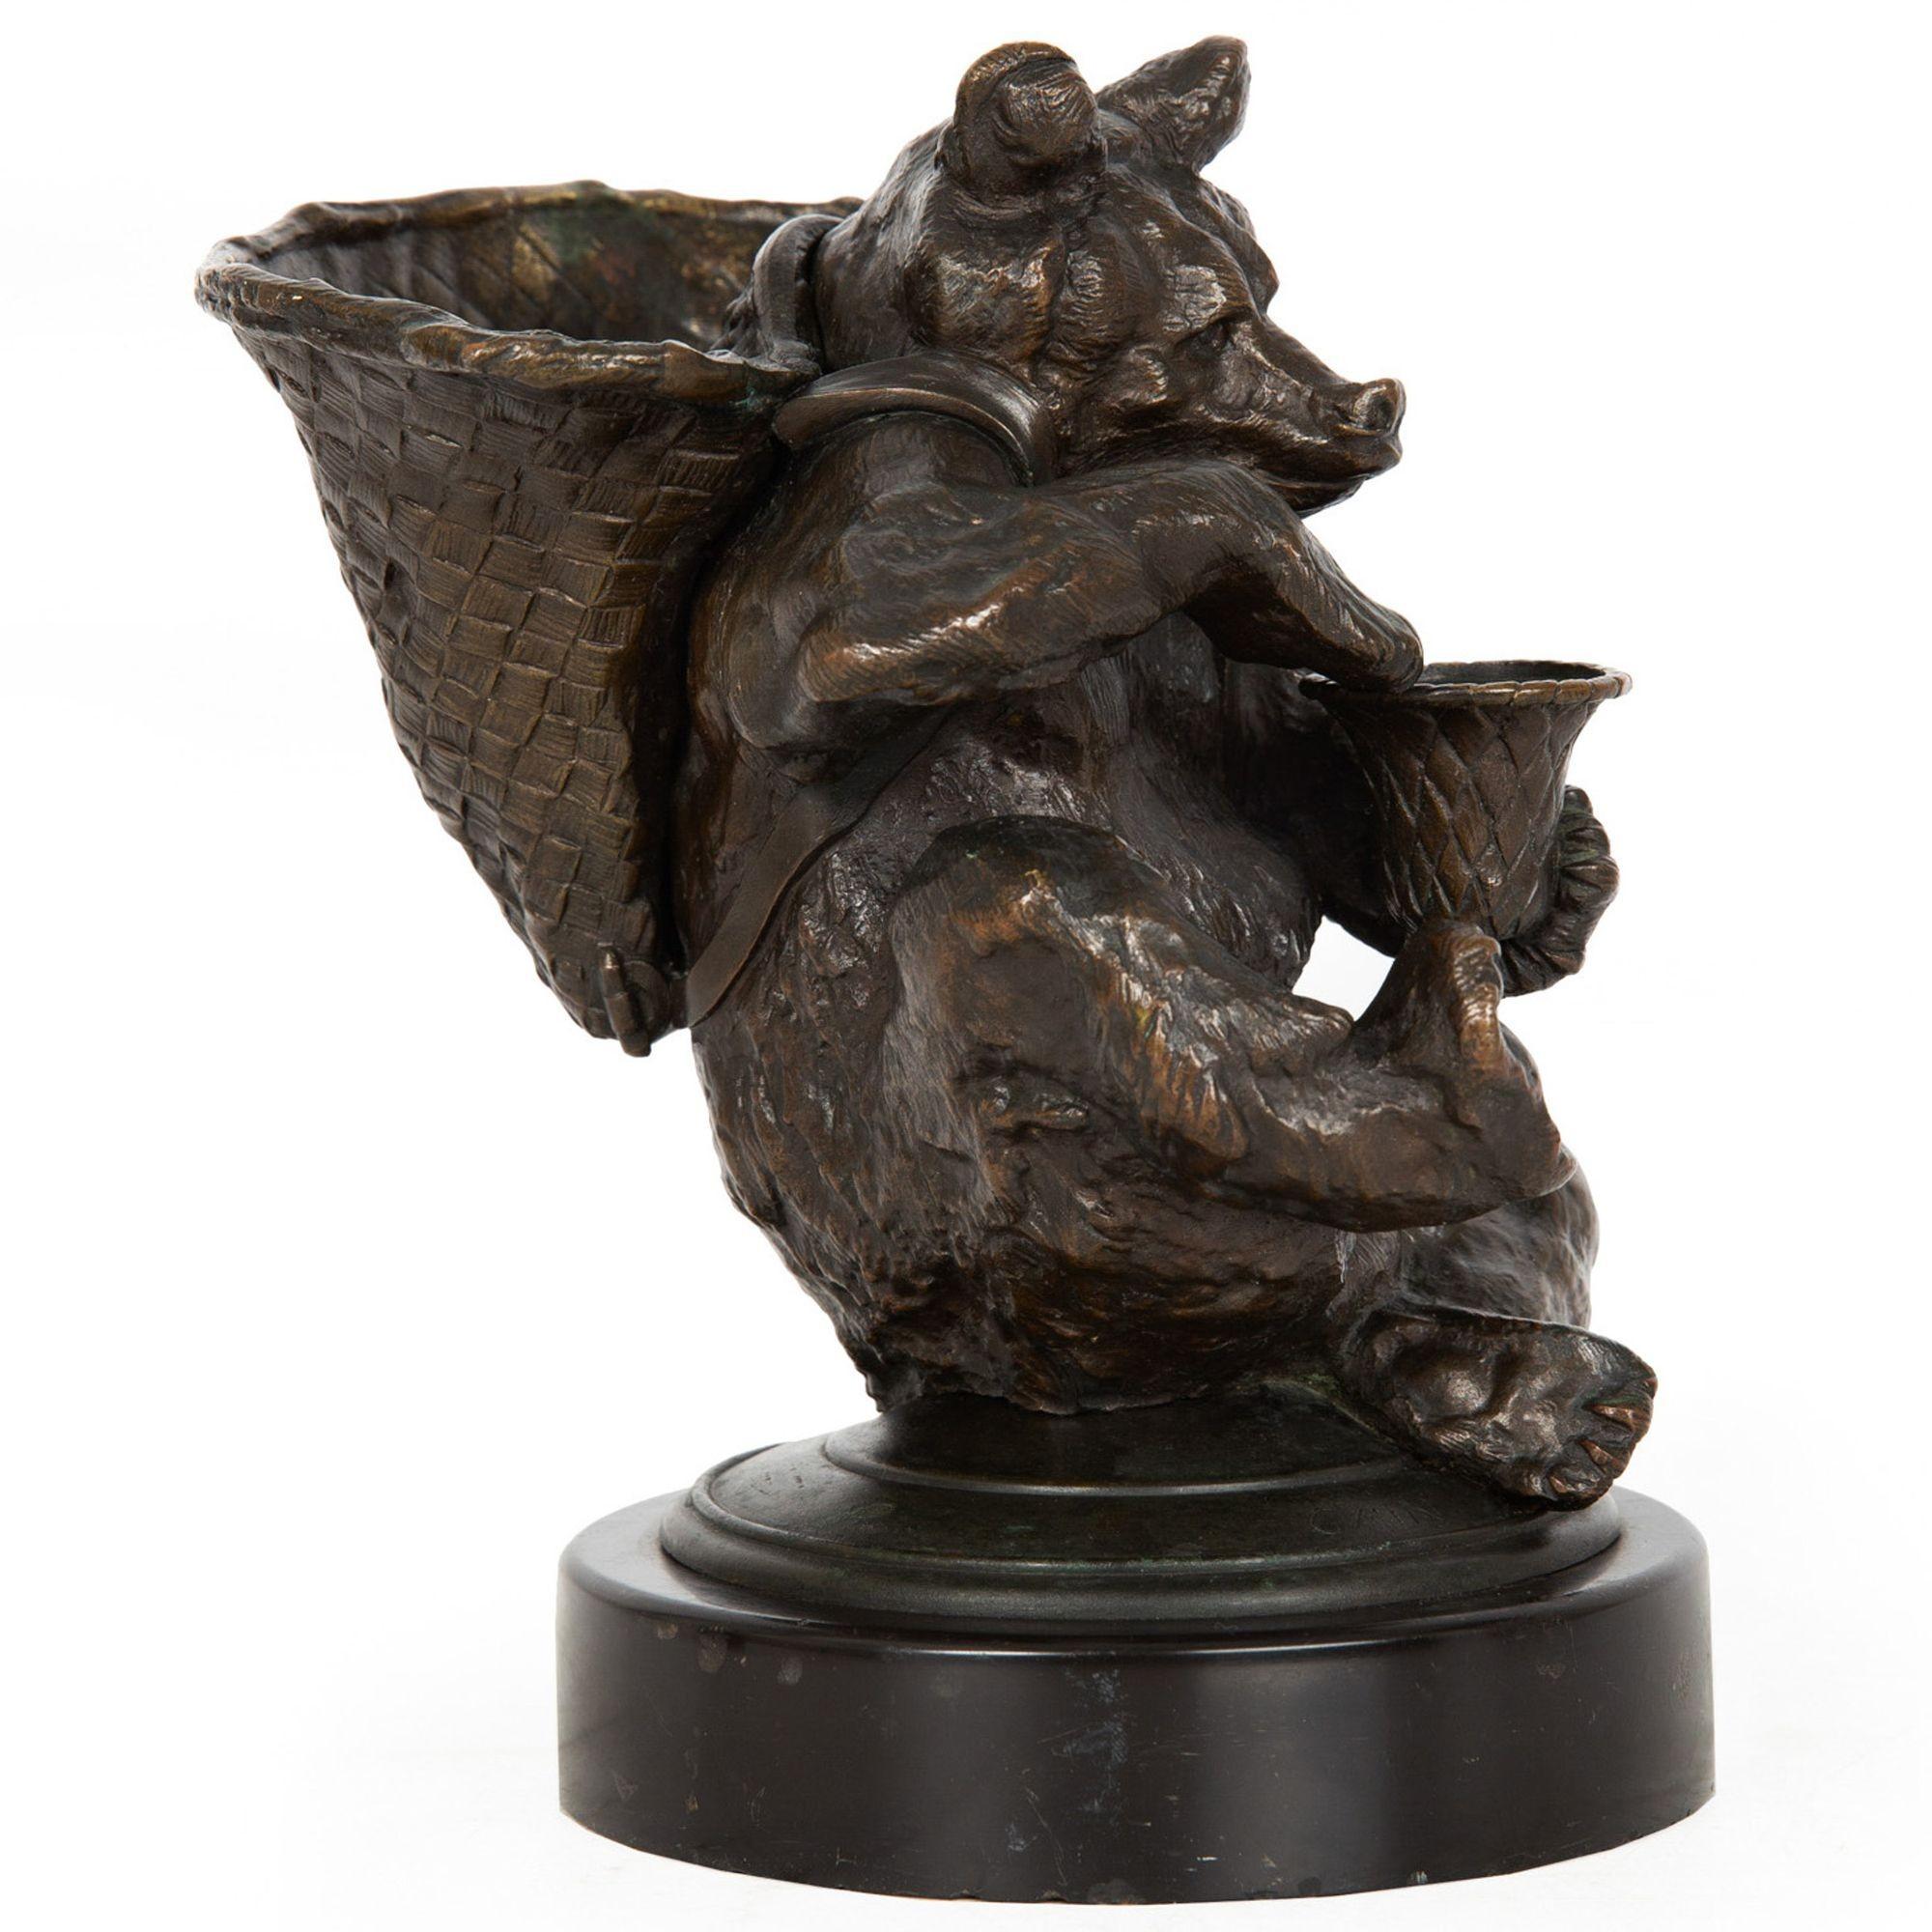 19th Century French Bronze Sculpture of Seated Harvester Bear by Auguste Cain